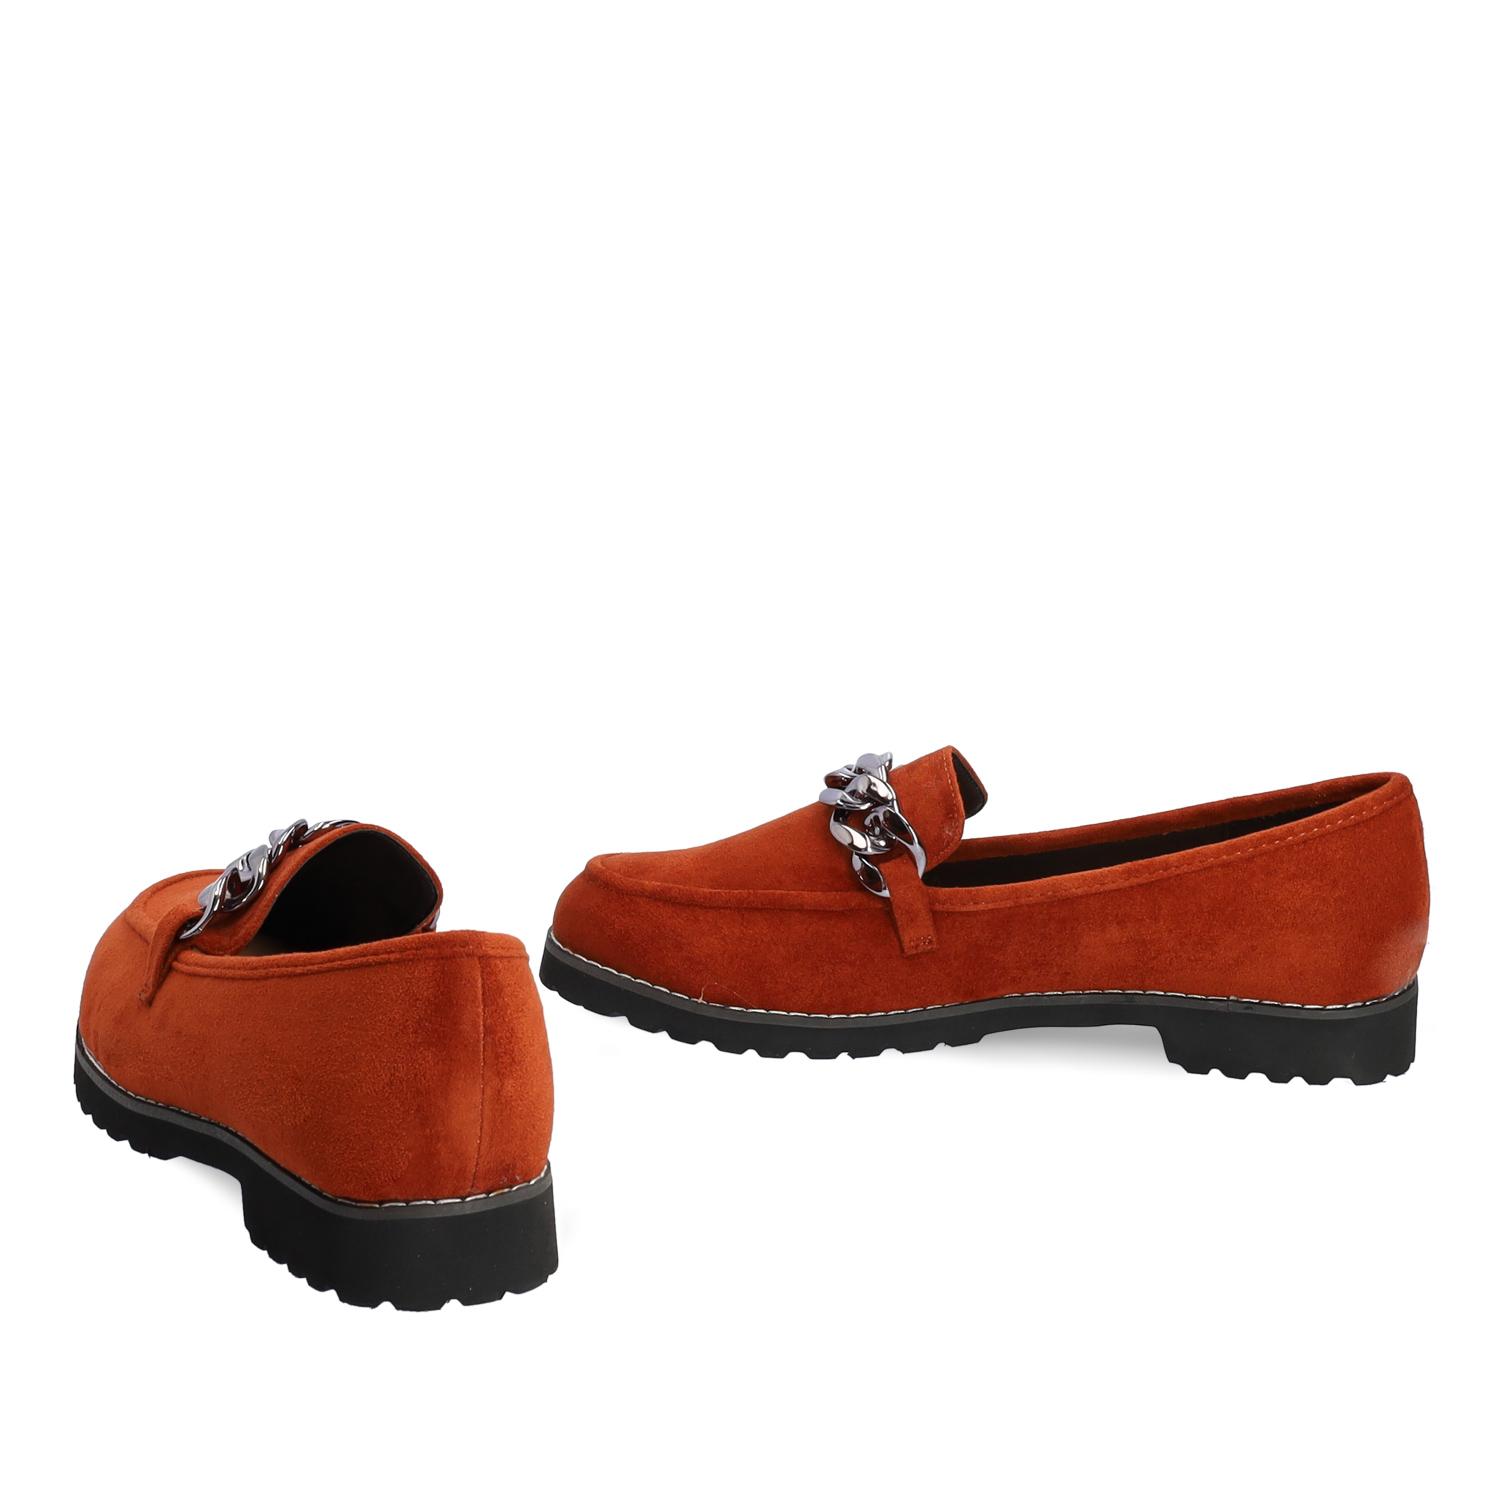 Moccasins in brick-red faux suede and track sole 